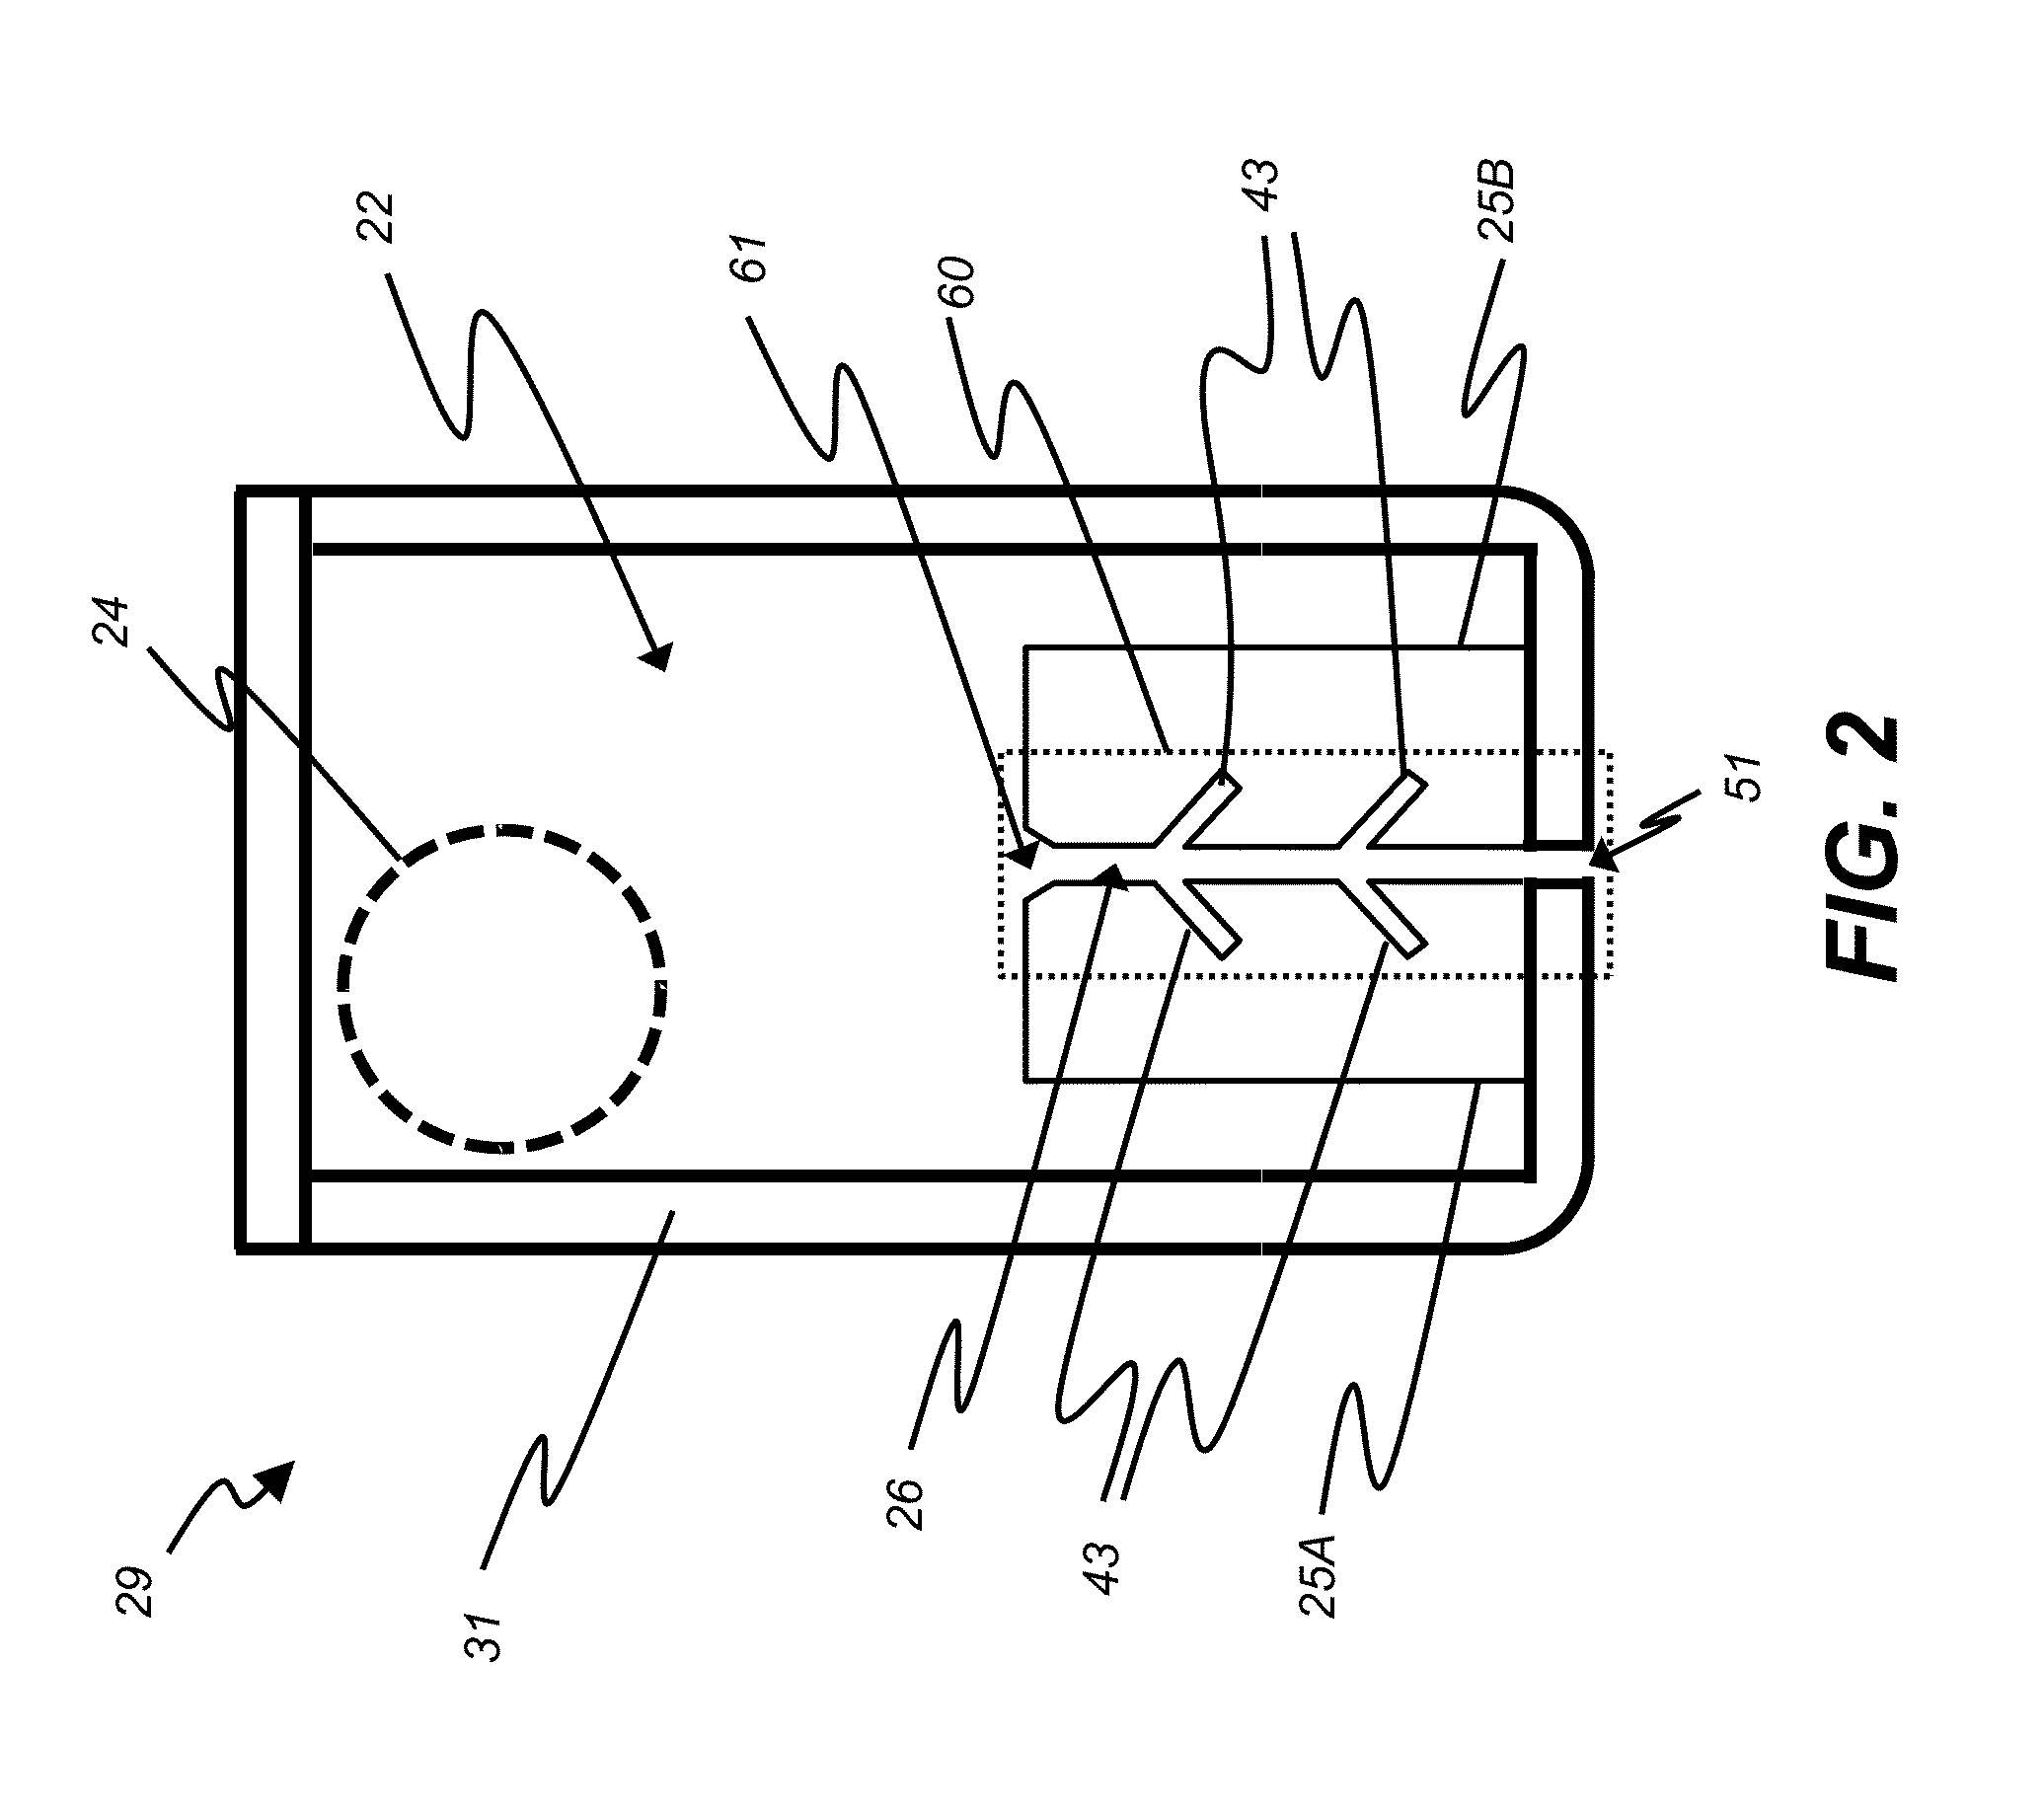 Acoustic drying system with interspersed exhaust channels